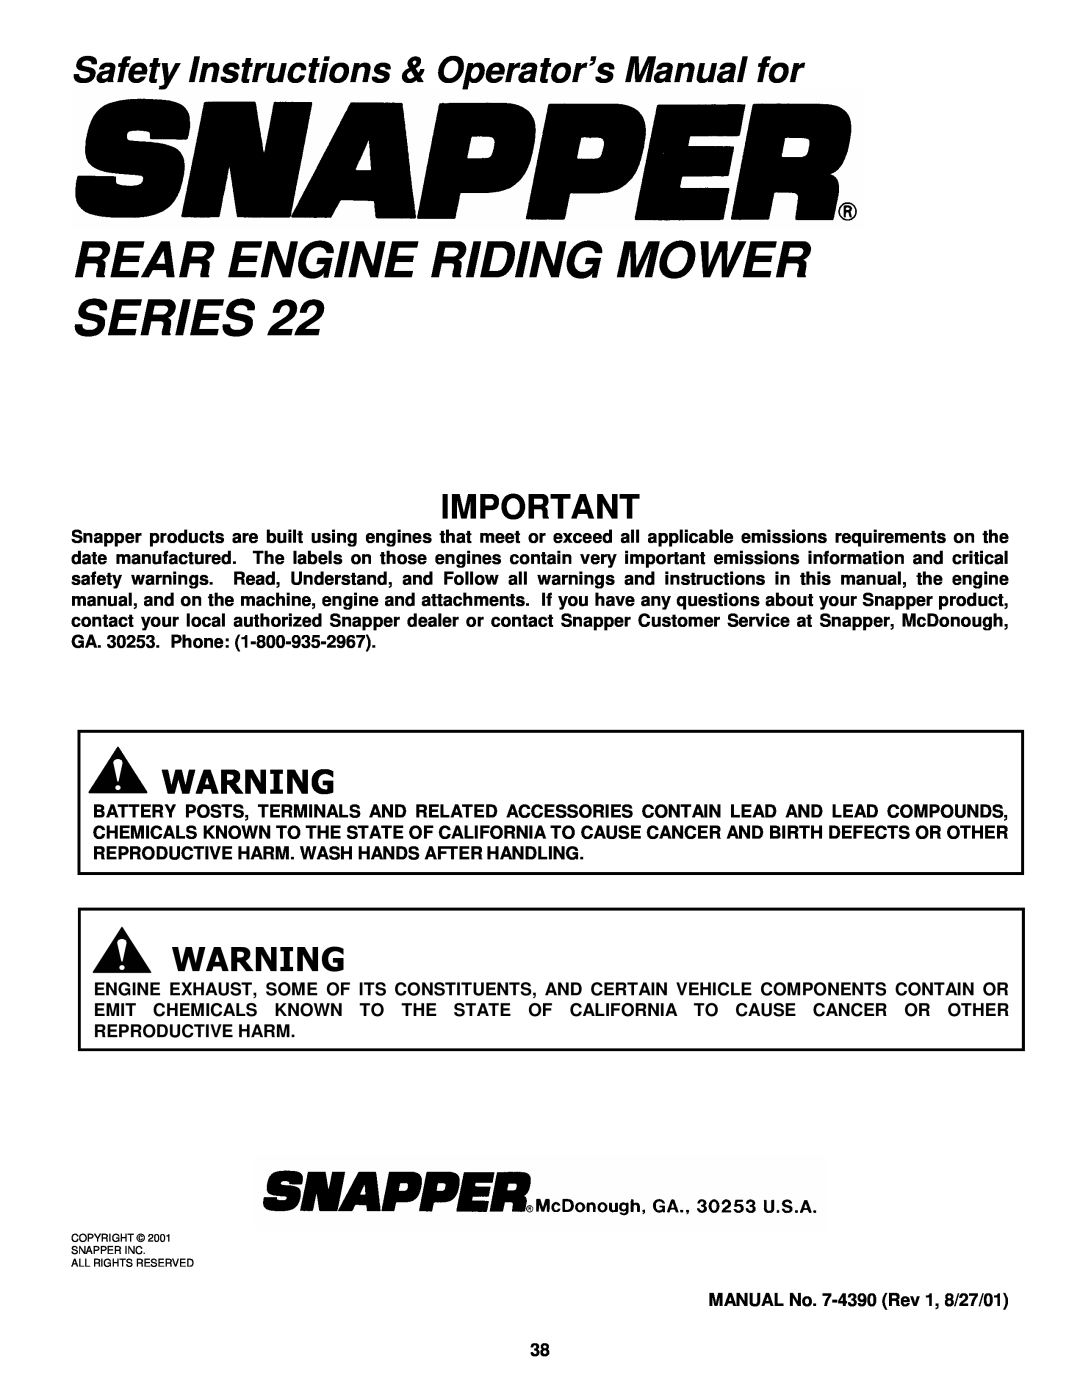 Snapper 281222BE, 331522KVE, 3314522BVE Rear Engine Riding Mower Series, Safety Instructions & Operator’s Manual for 